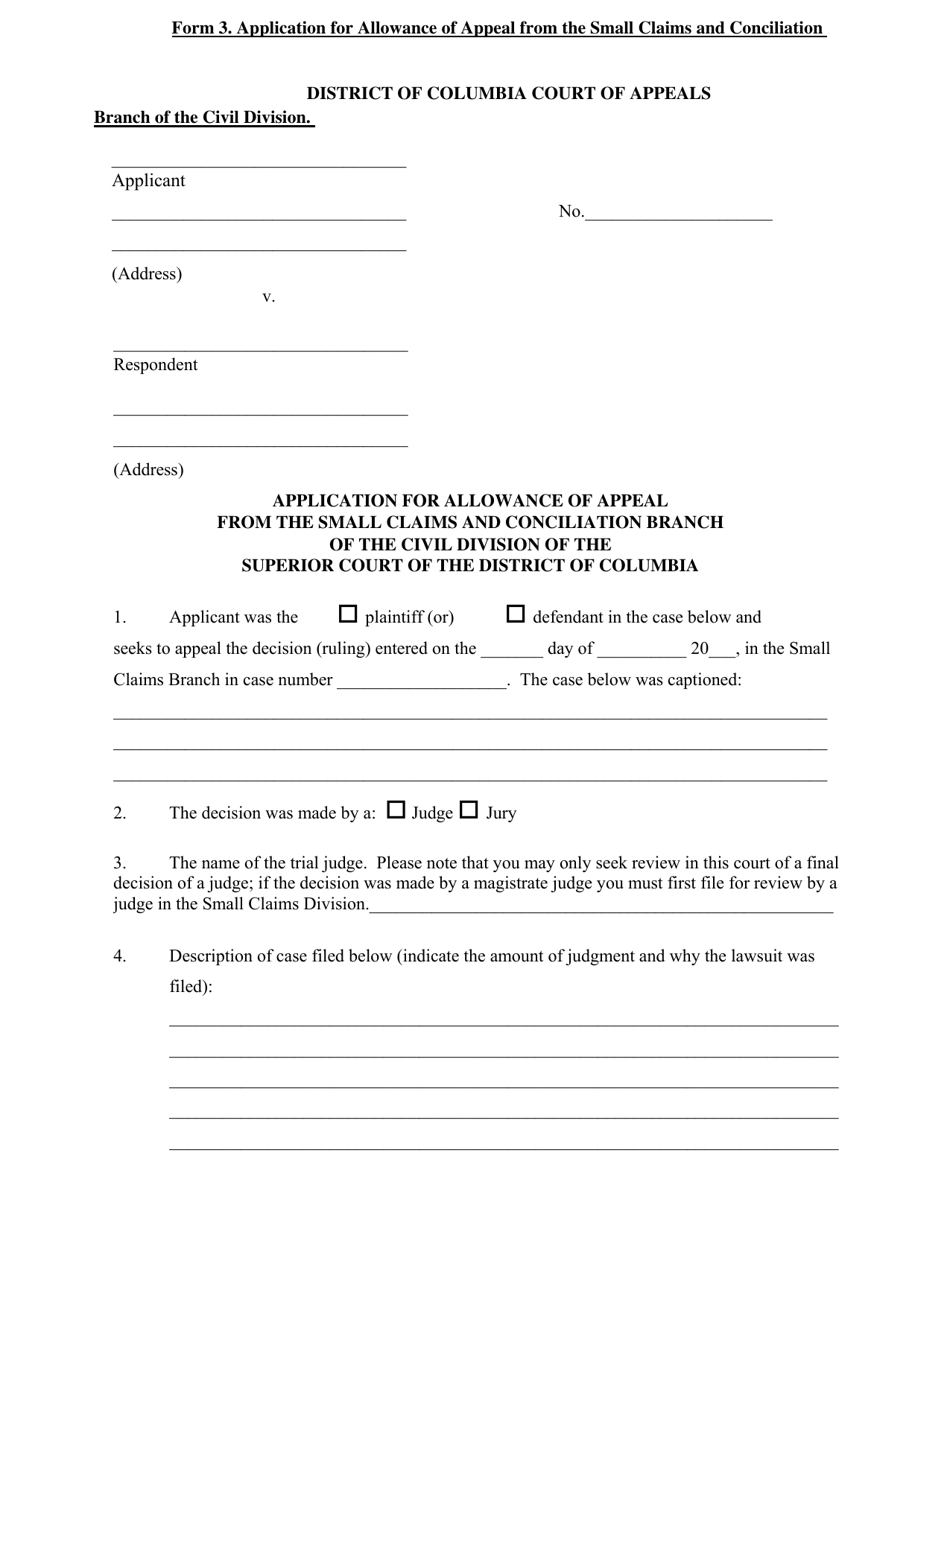 Form 3 Application for Allowance of Appeal From the Small Claims and Conciliation Branch of the Civil Division of the Superior Court of the District of Columbia - Washington, D.C., Page 1